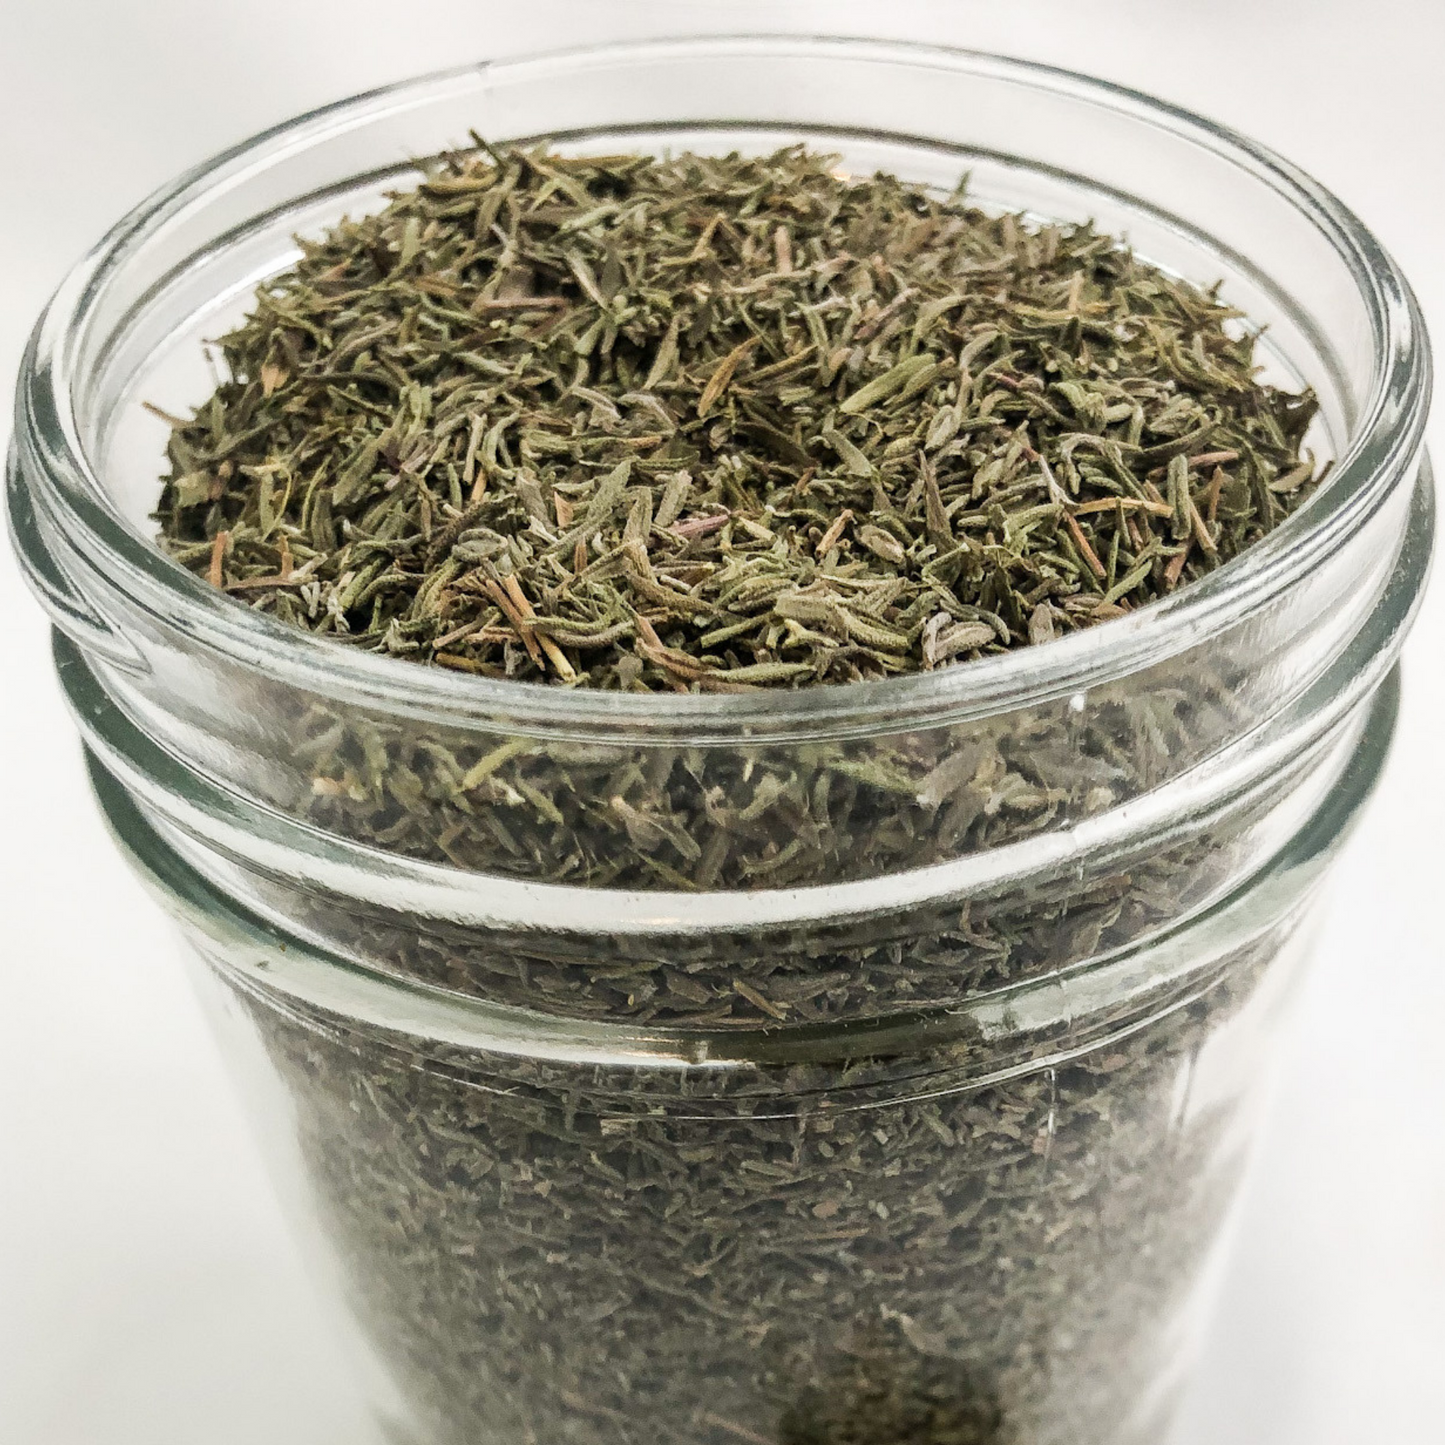 upclose image of dried thyme in a clear glass jar with white background